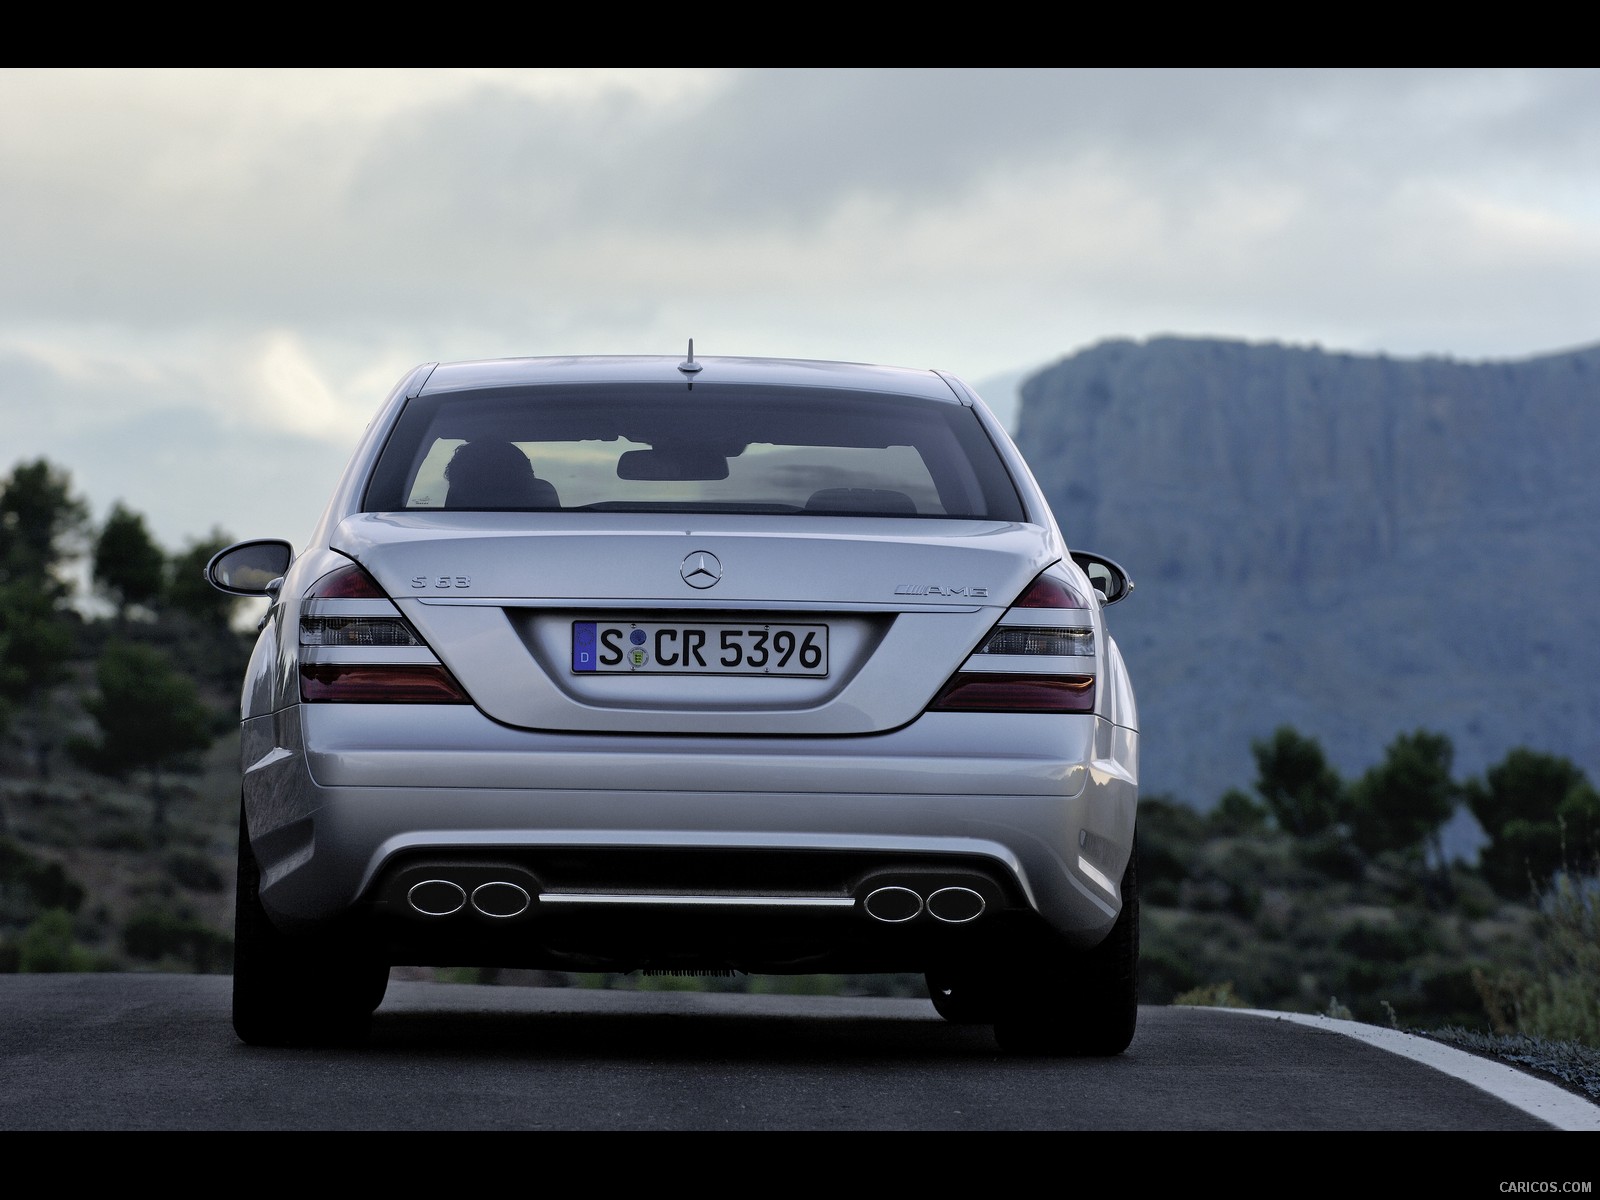 Mercedes-Benz S63 AMG (2010)  - Rear Angle , #2 of 12